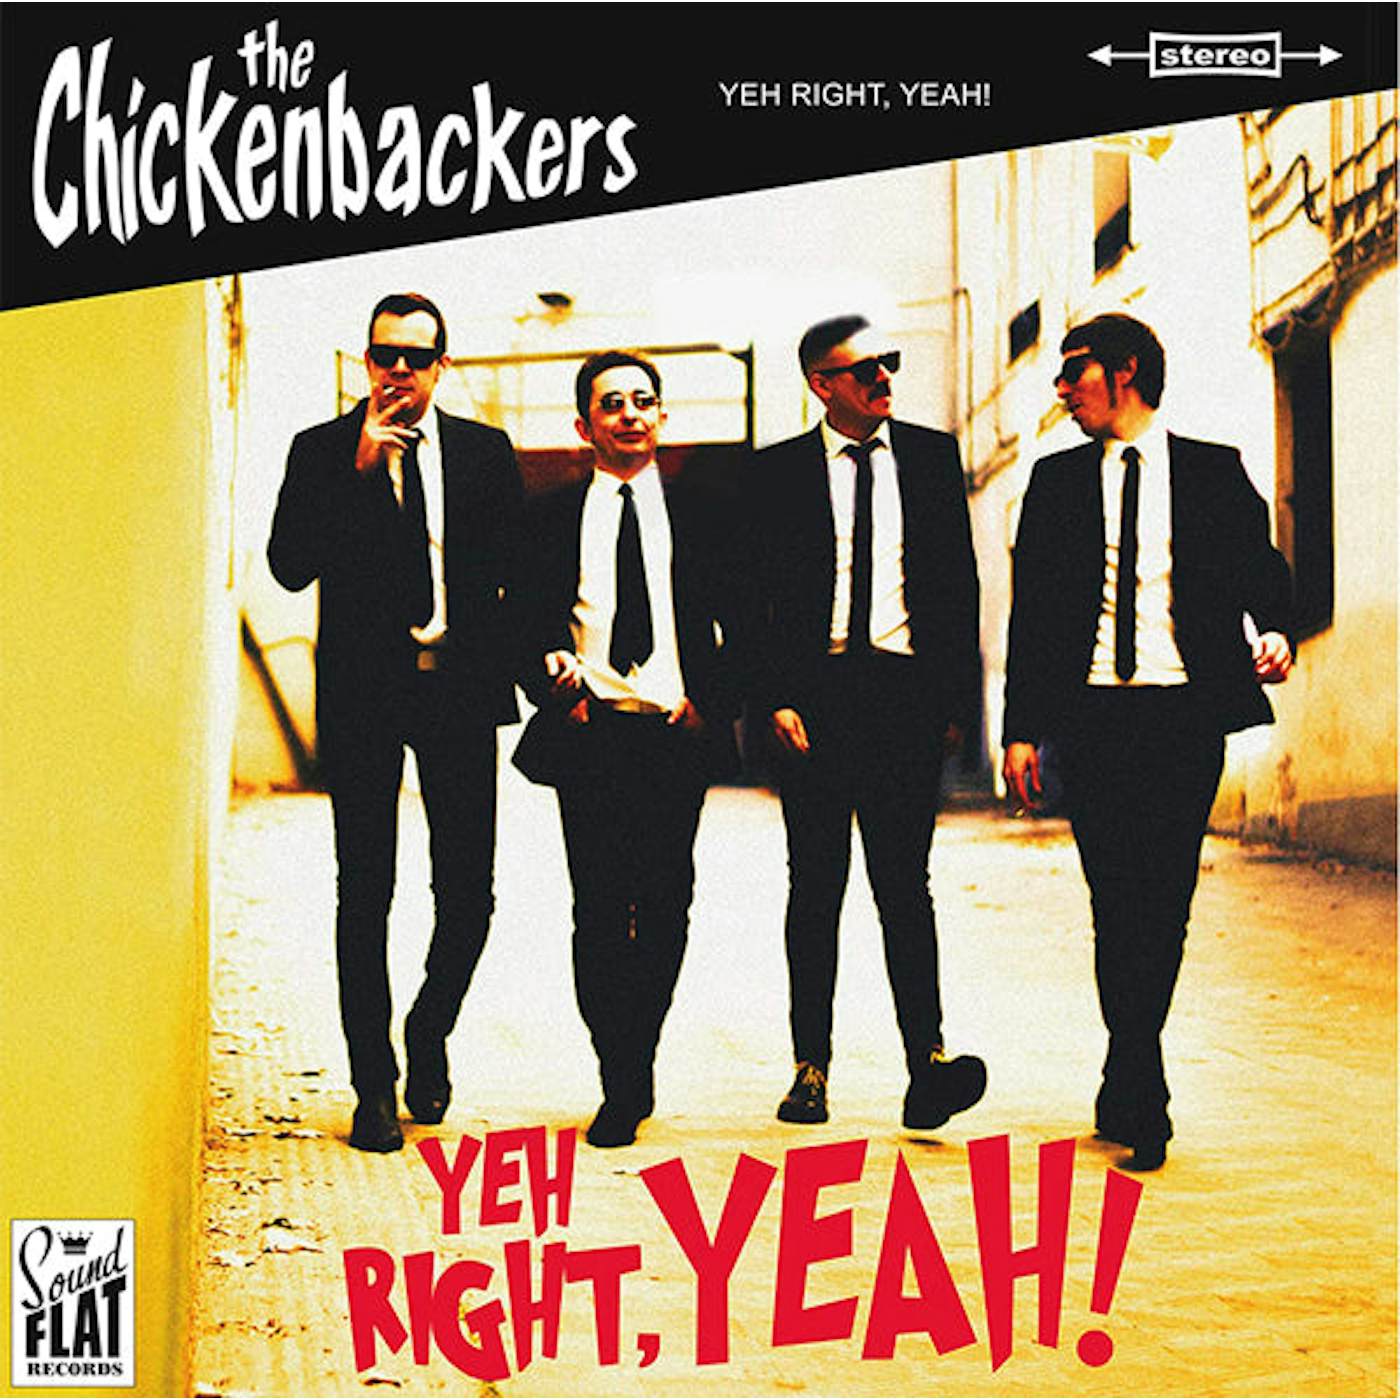  The Chickenbackers LP - Yeh Right, Yeah! (Vinyl)